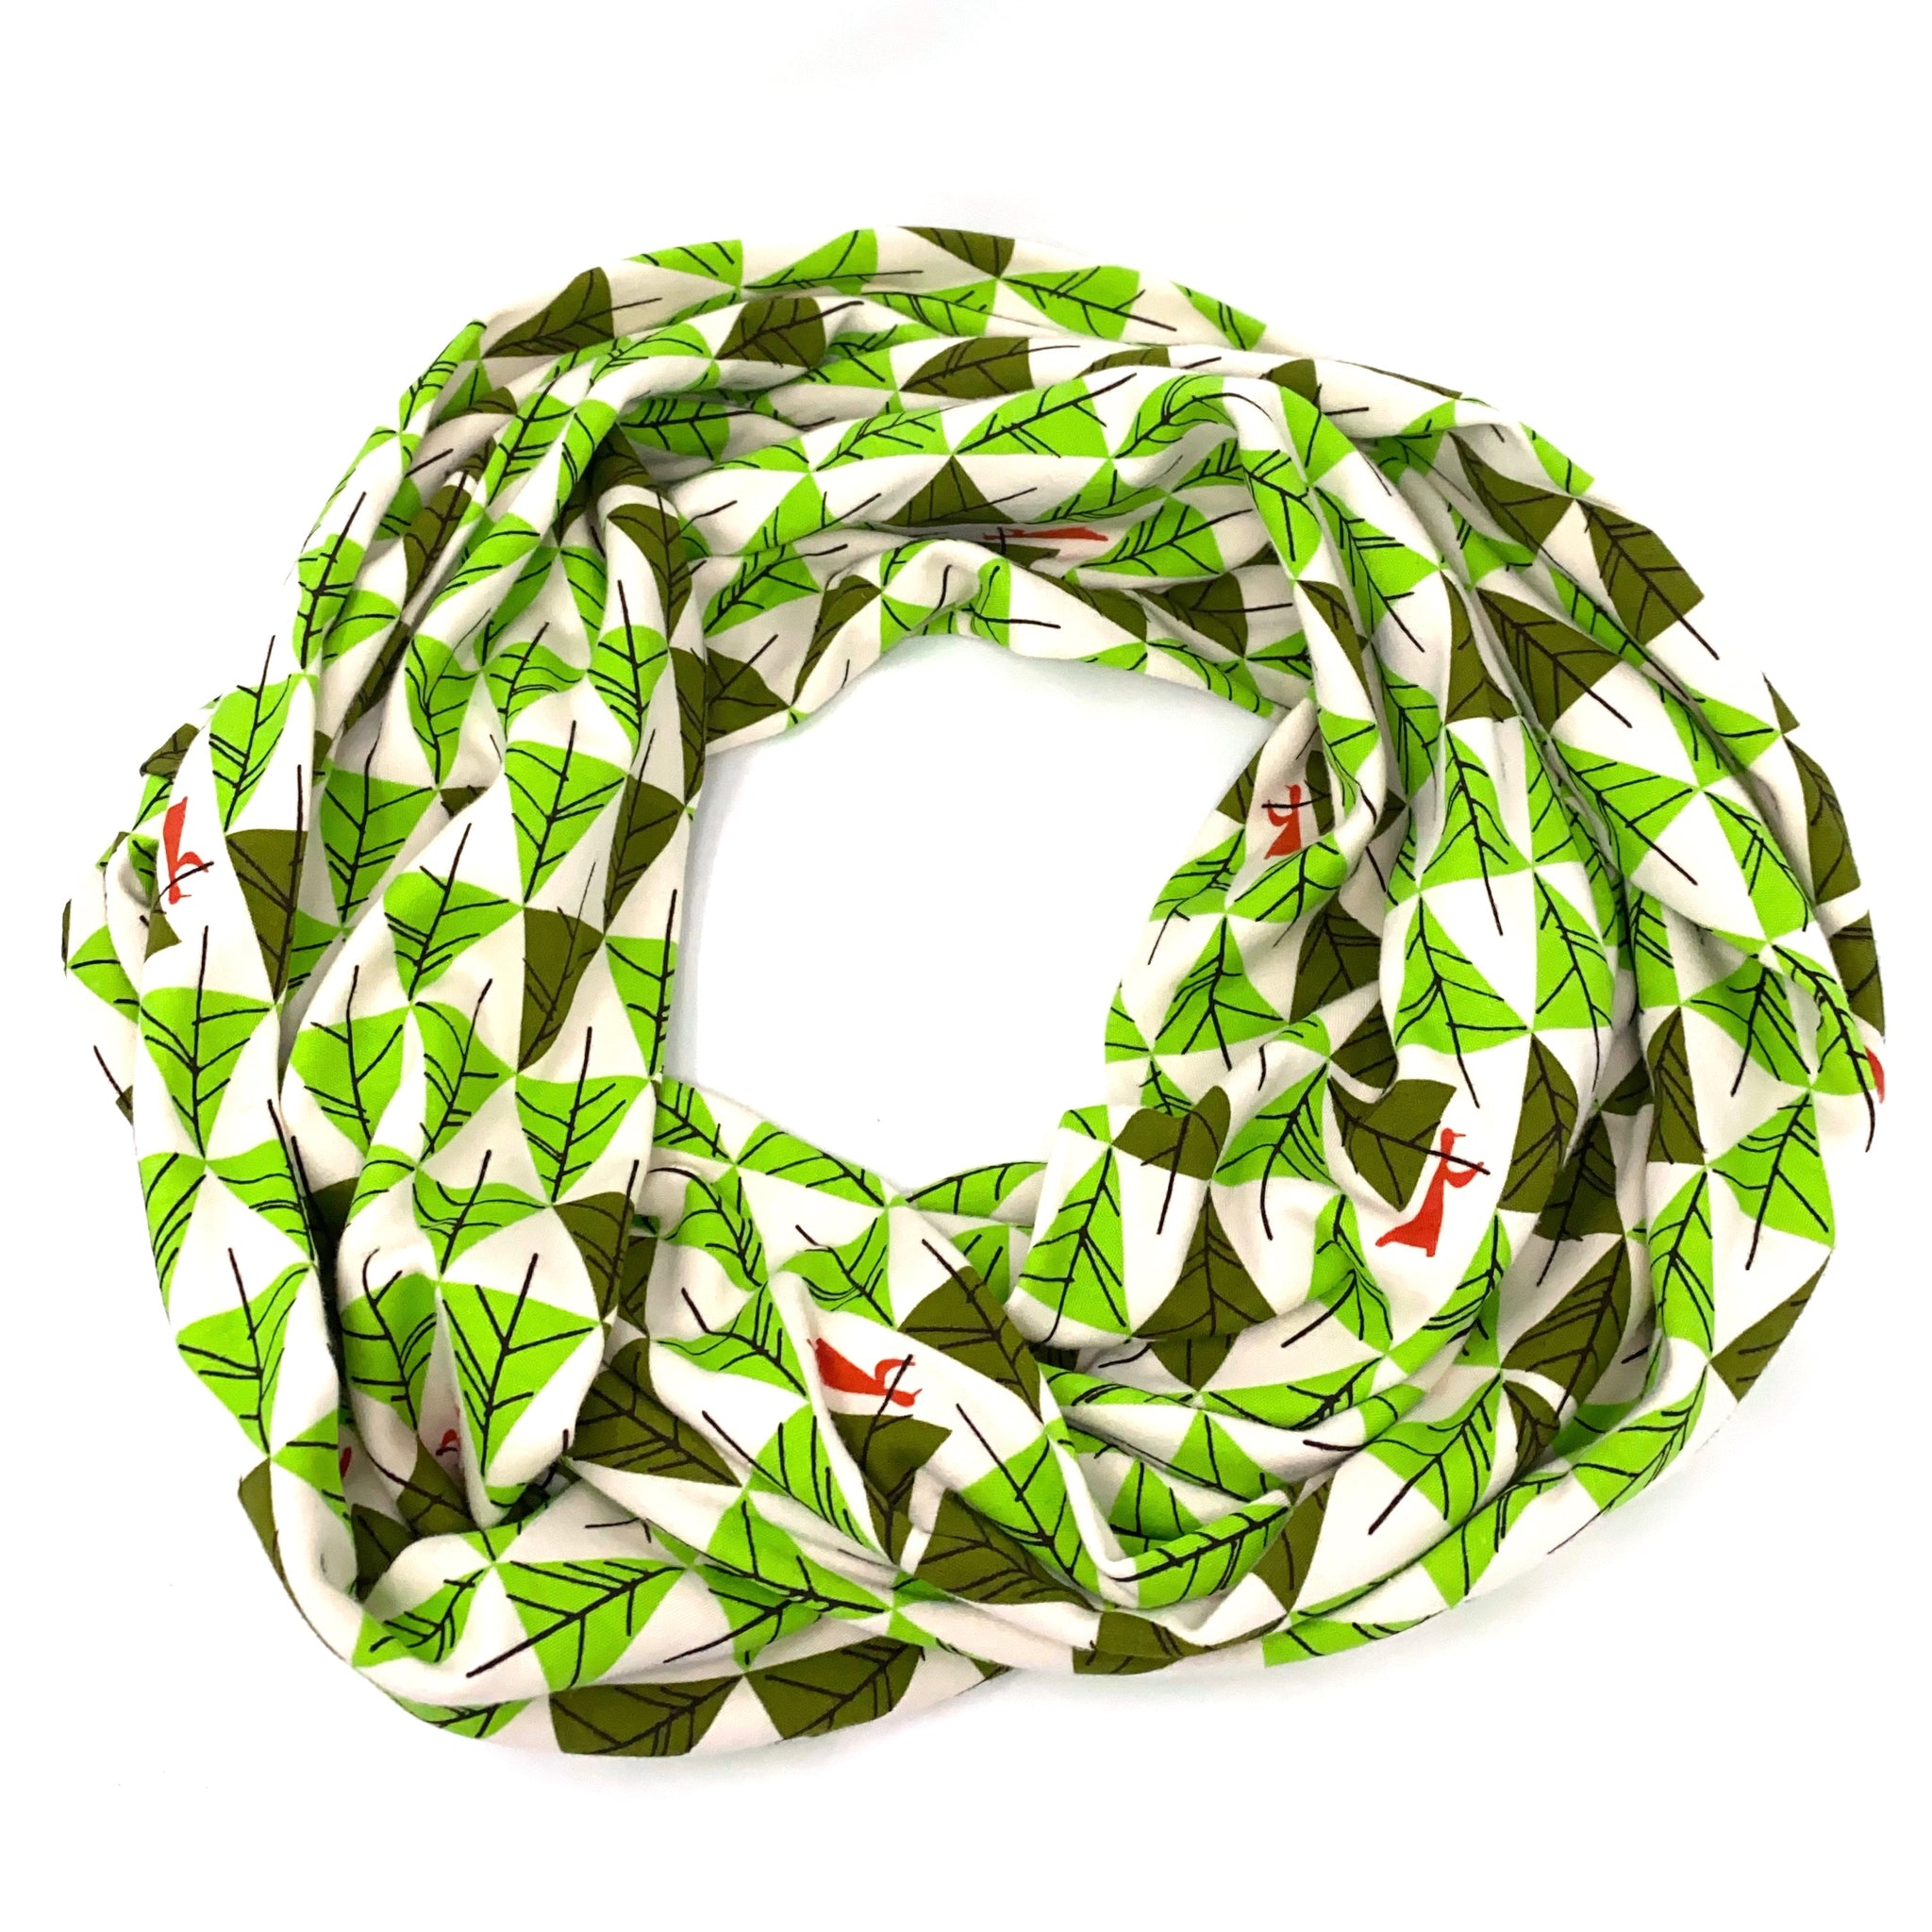 Infinity Scarf Charley Harper Perfect Tree